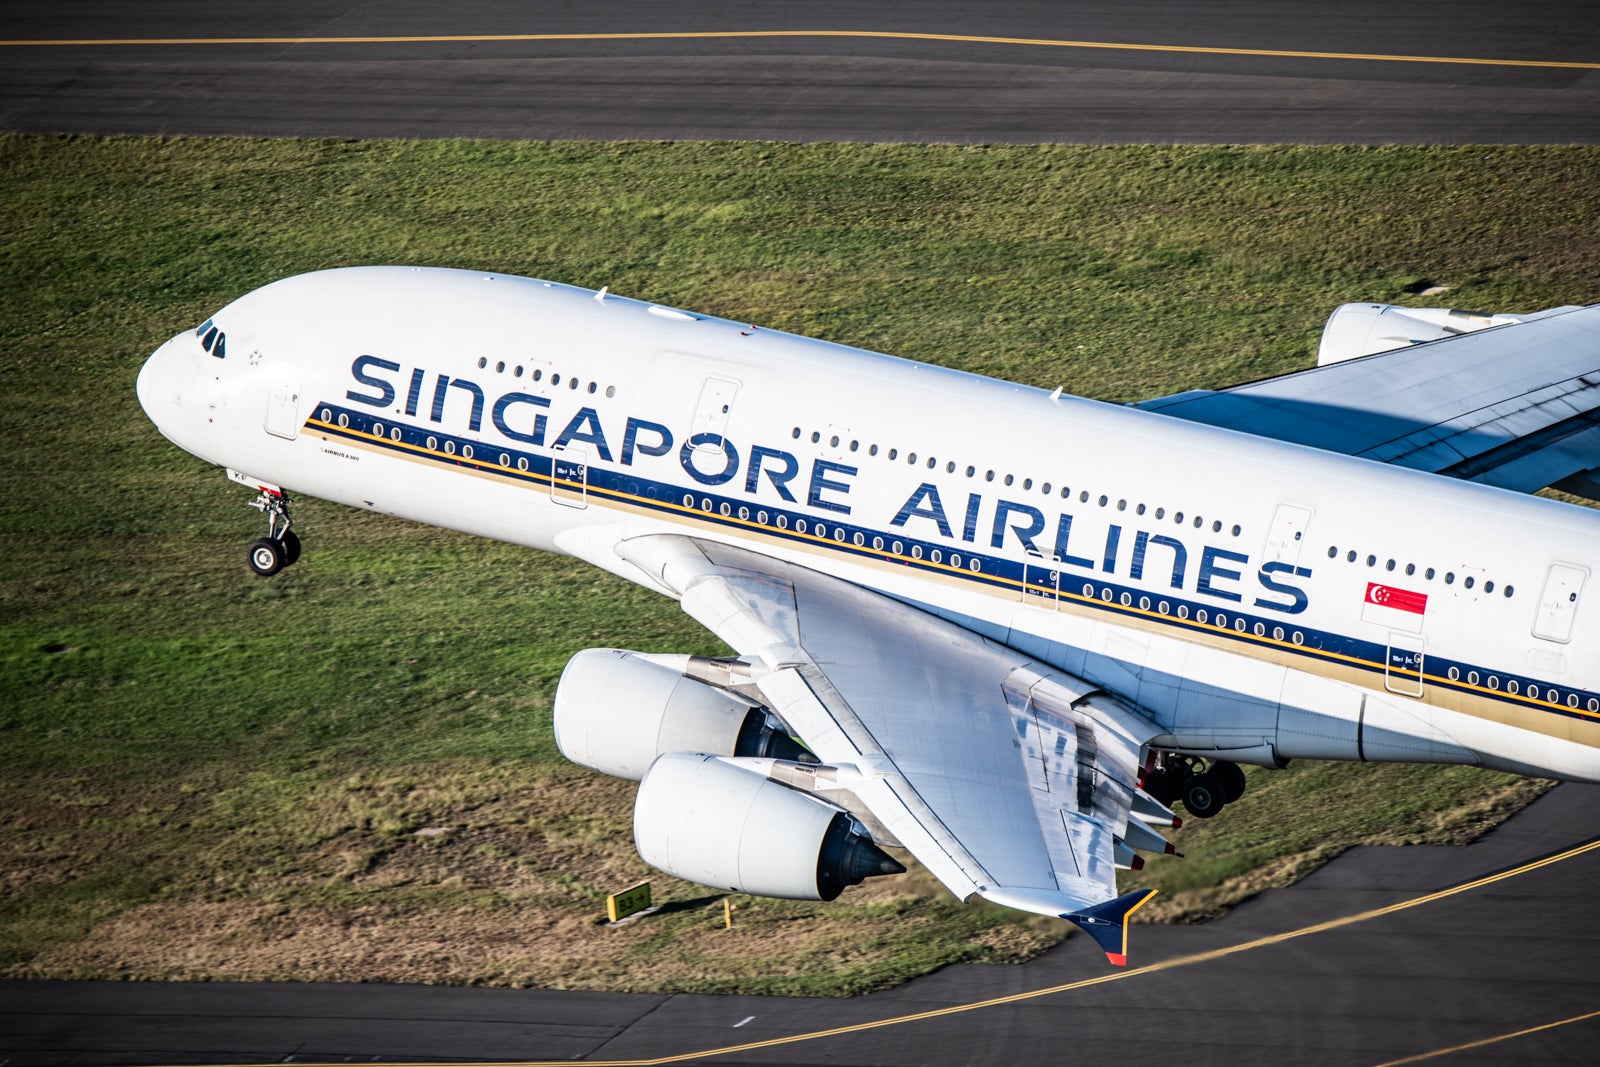 Singapore Airlines A380 at Sydney Airport (SYD) (3)- Ryan Patterson